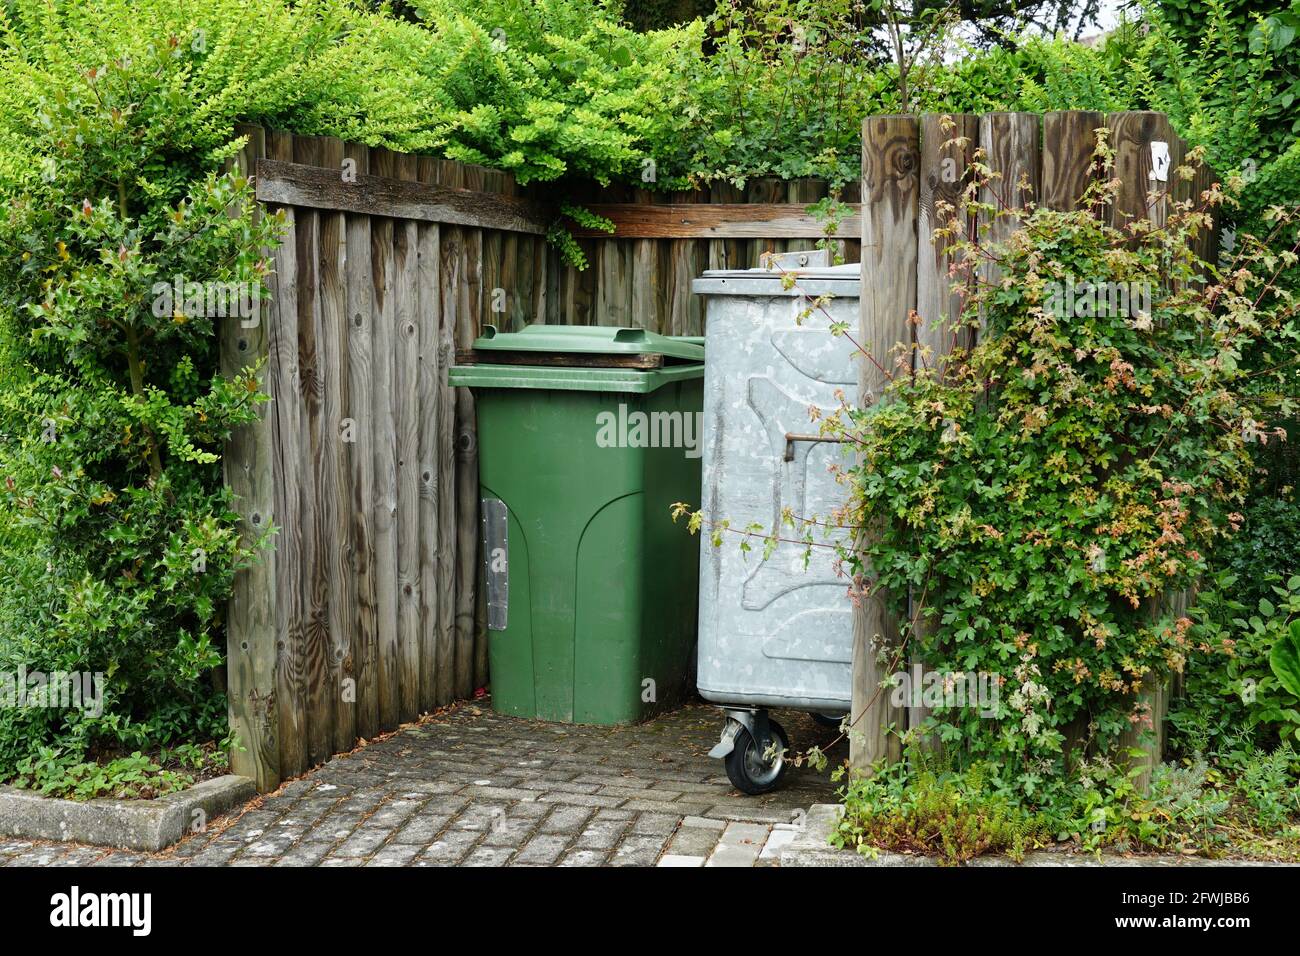 Metal container for house waste and plastic container for organic waste in a wooden niche. Stock Photo